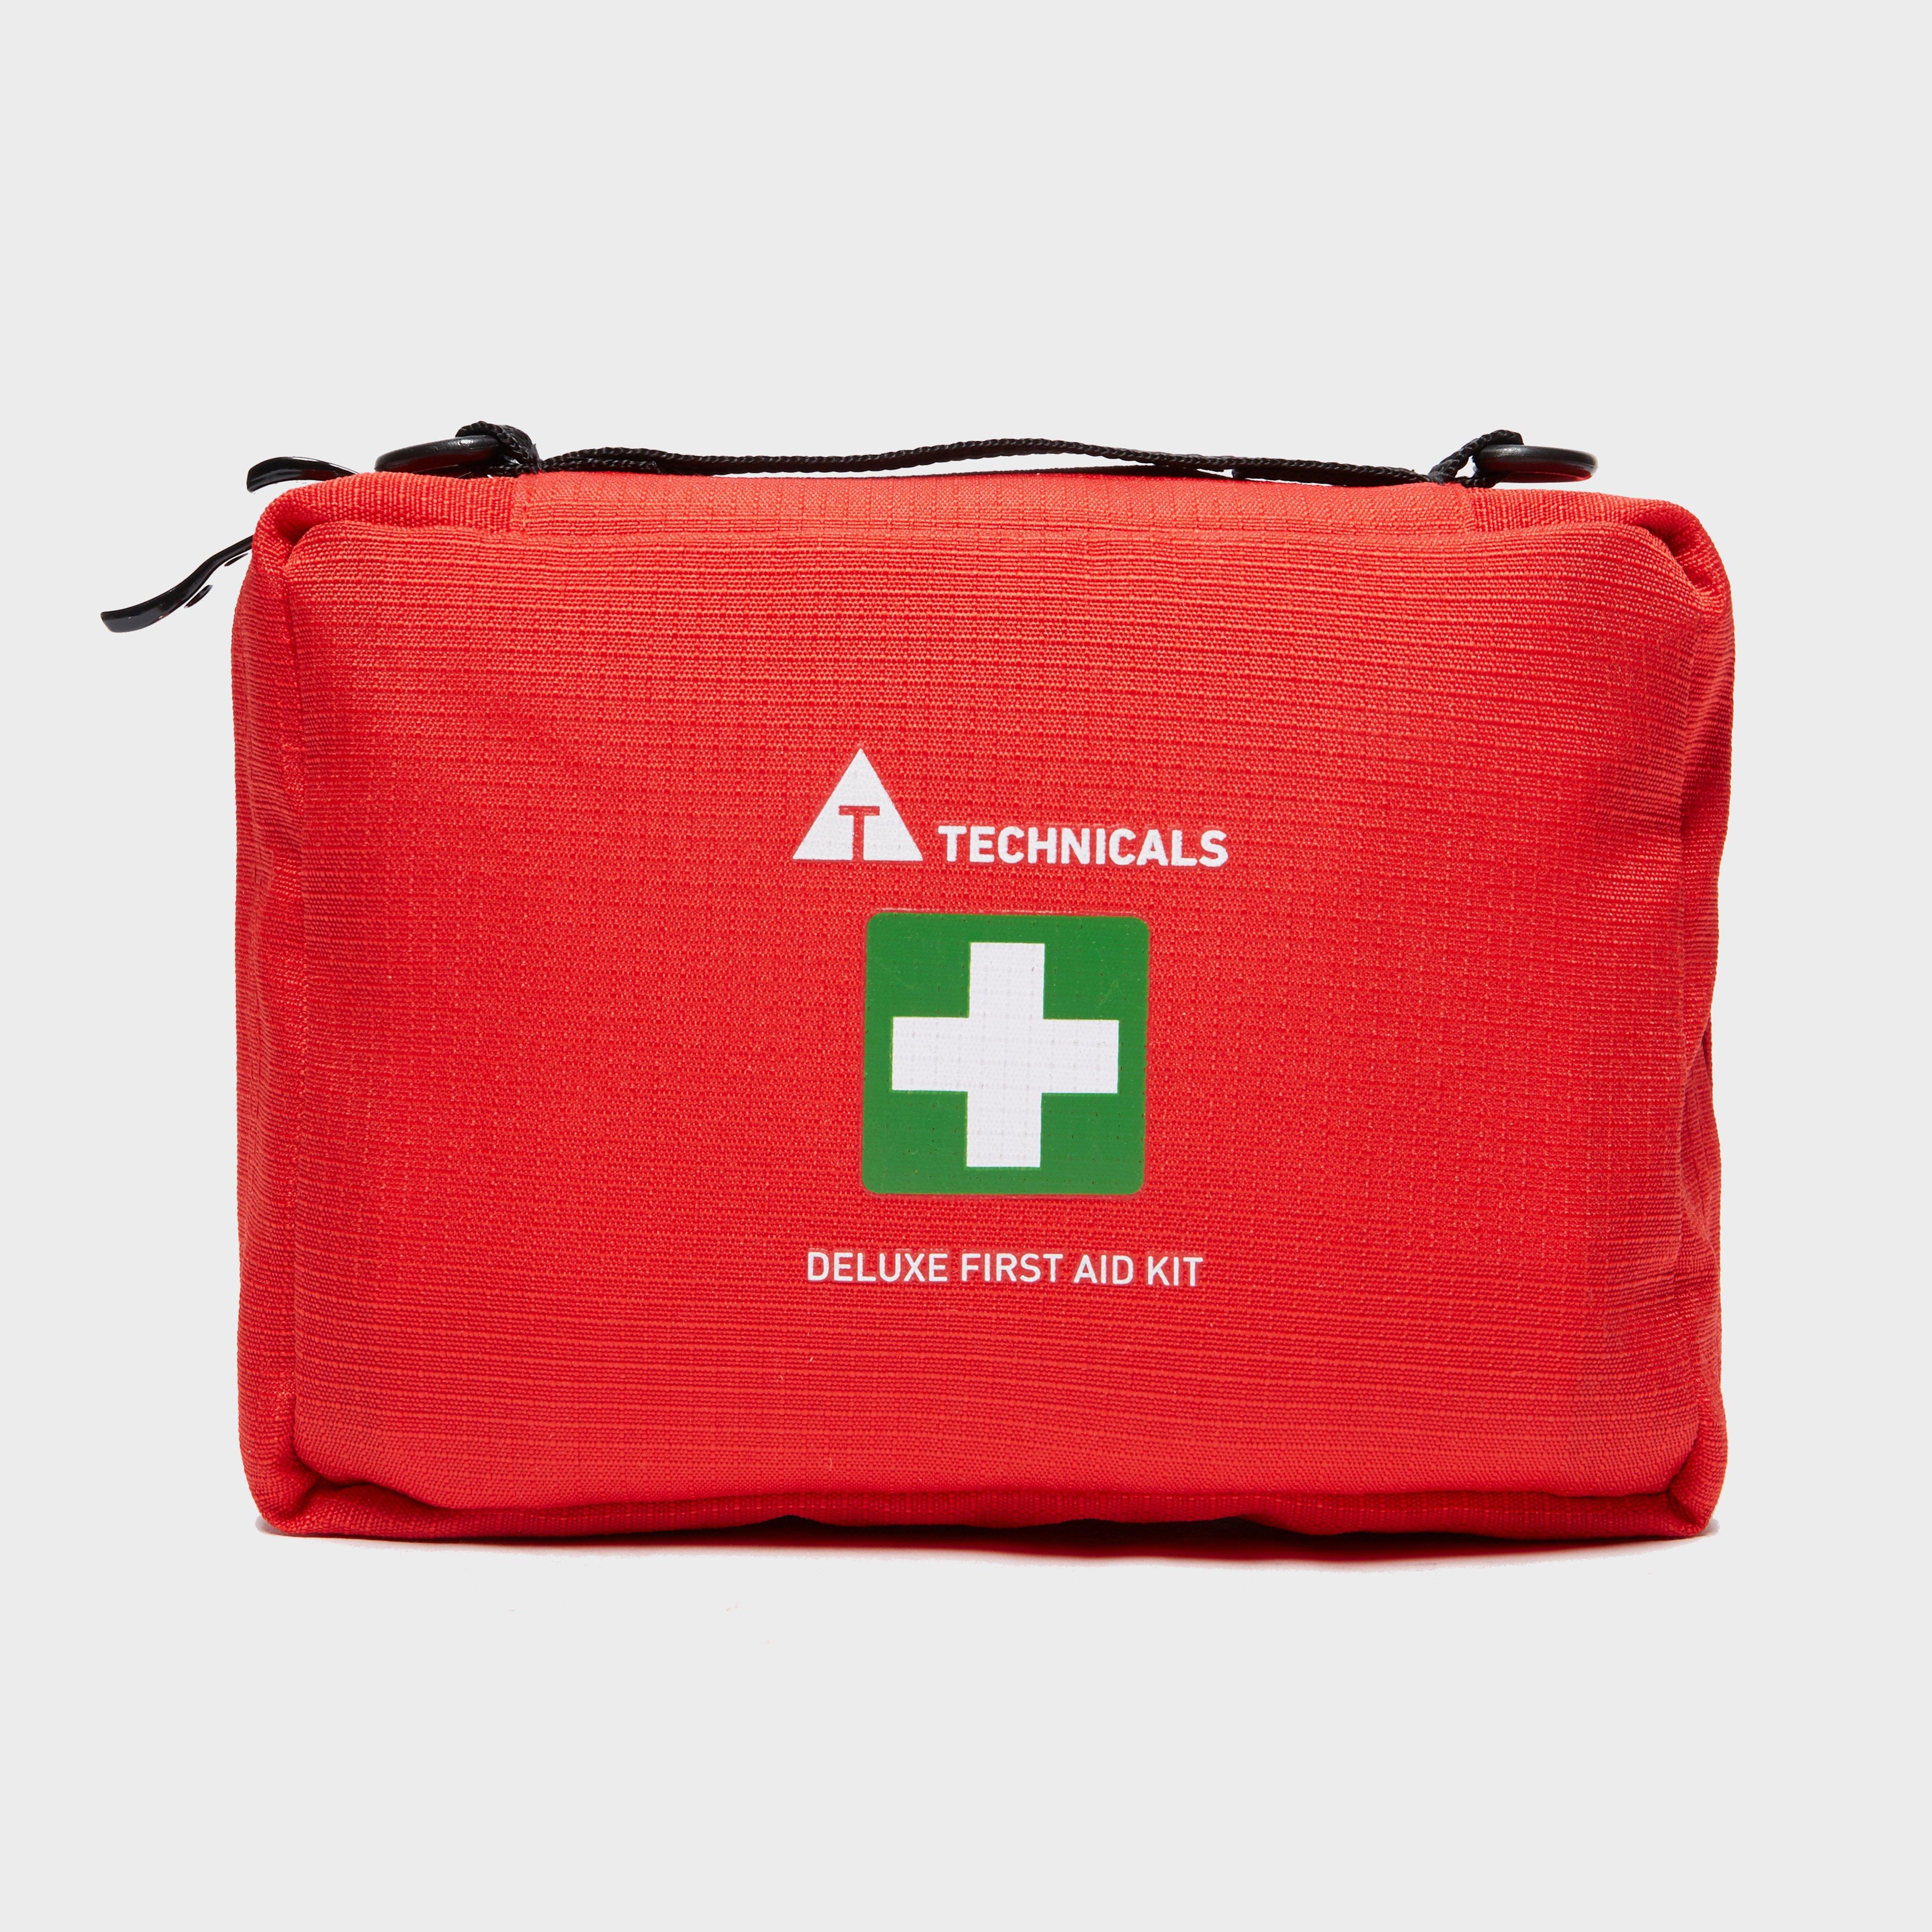 Image of Technicals Deluxe First Aid Kit - Only At Go - Red/Red, RED/RED